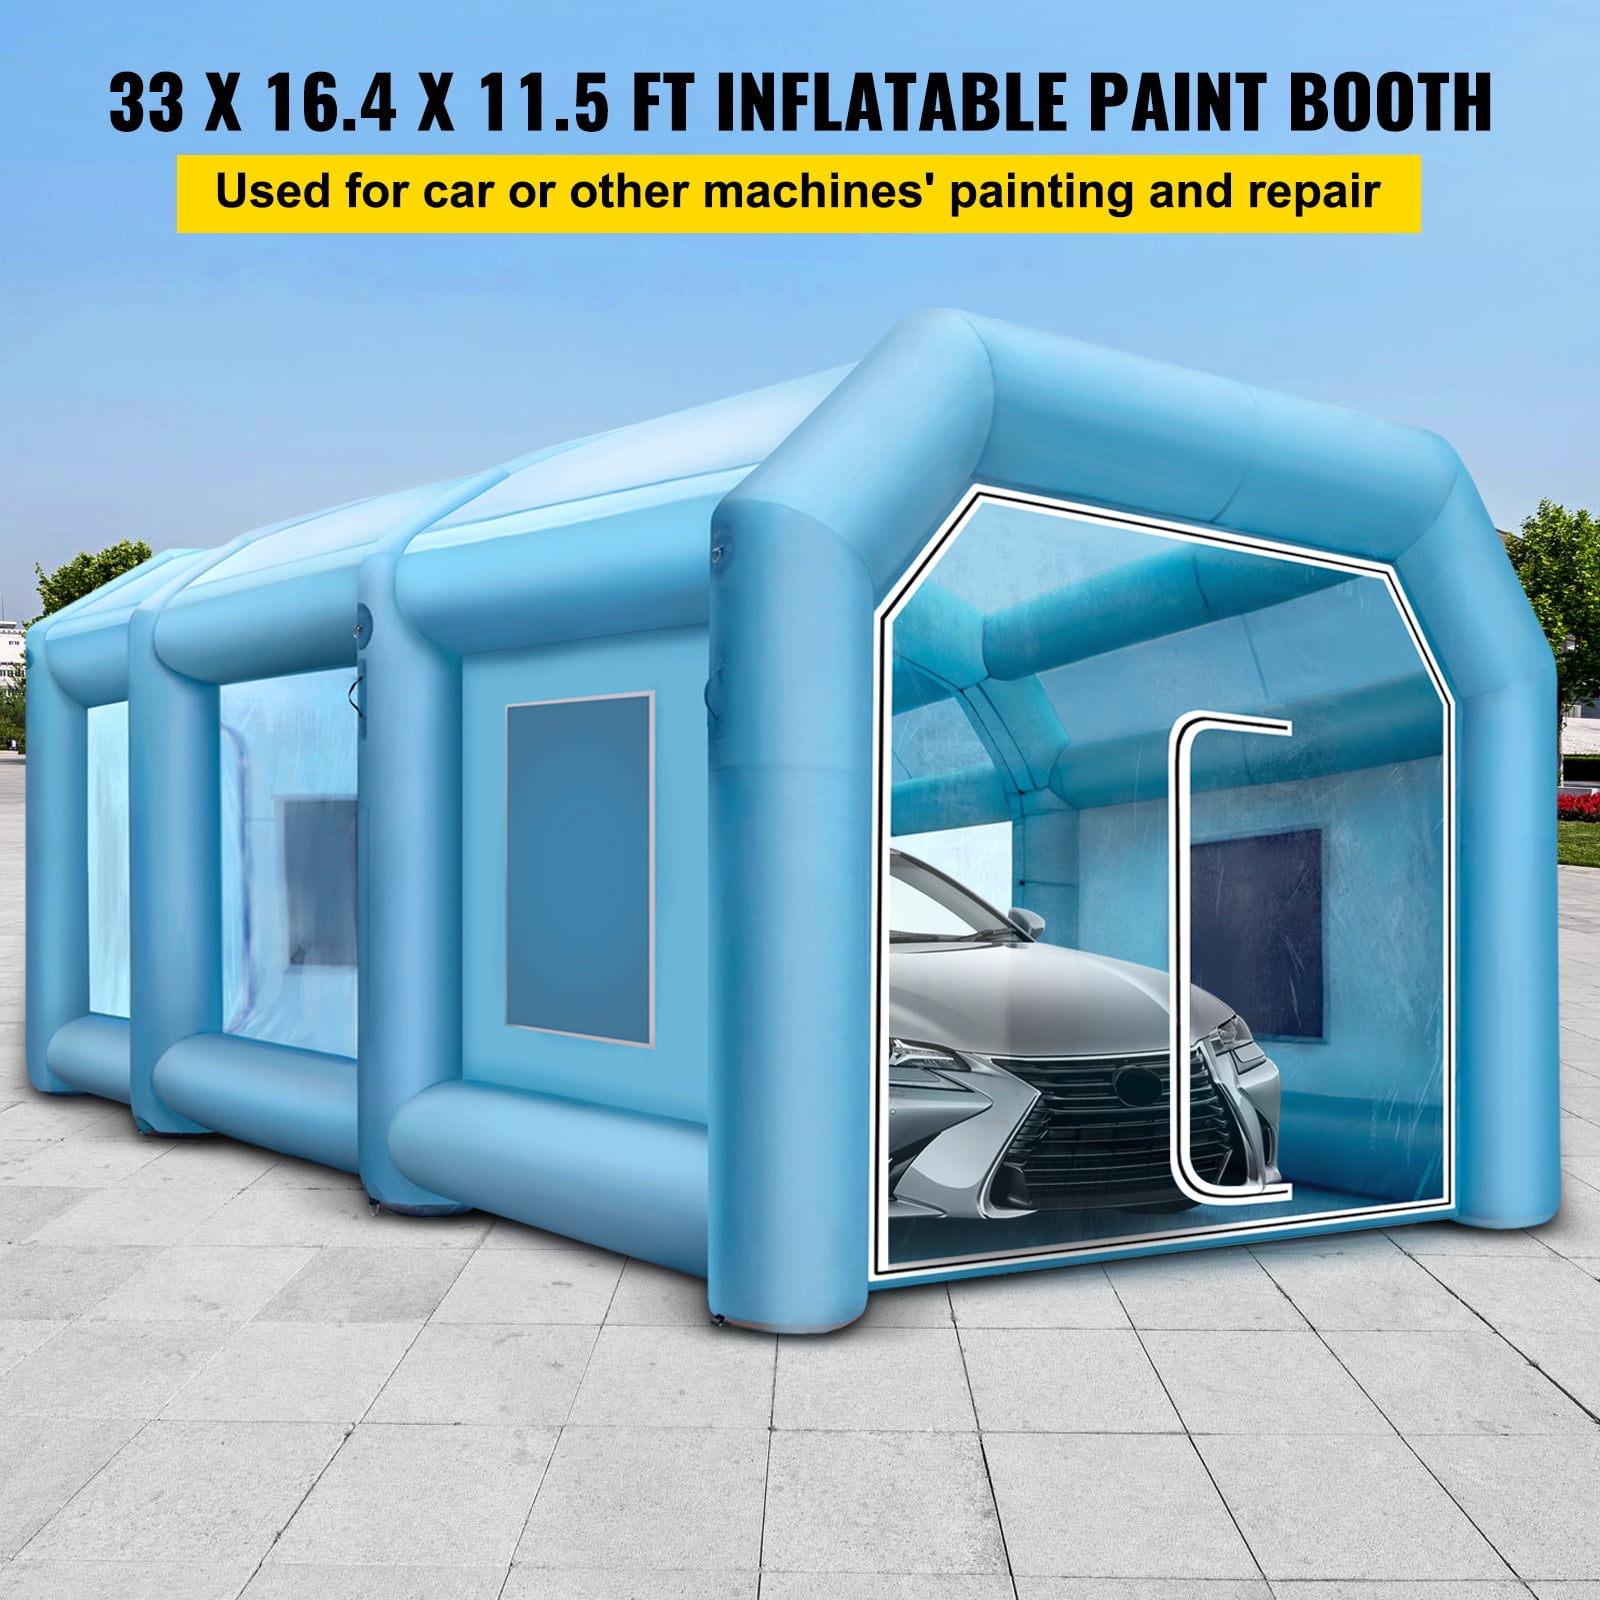 VEVOR Inflatable Paint Booth 20 ft. x 10 ft. x 8.2 ft. Car Paint Tent  w/.Filter & 2-Blowers for Car Parking Tent Workstation CQZP6MPQZPWGYSM01V1  - The Home Depot